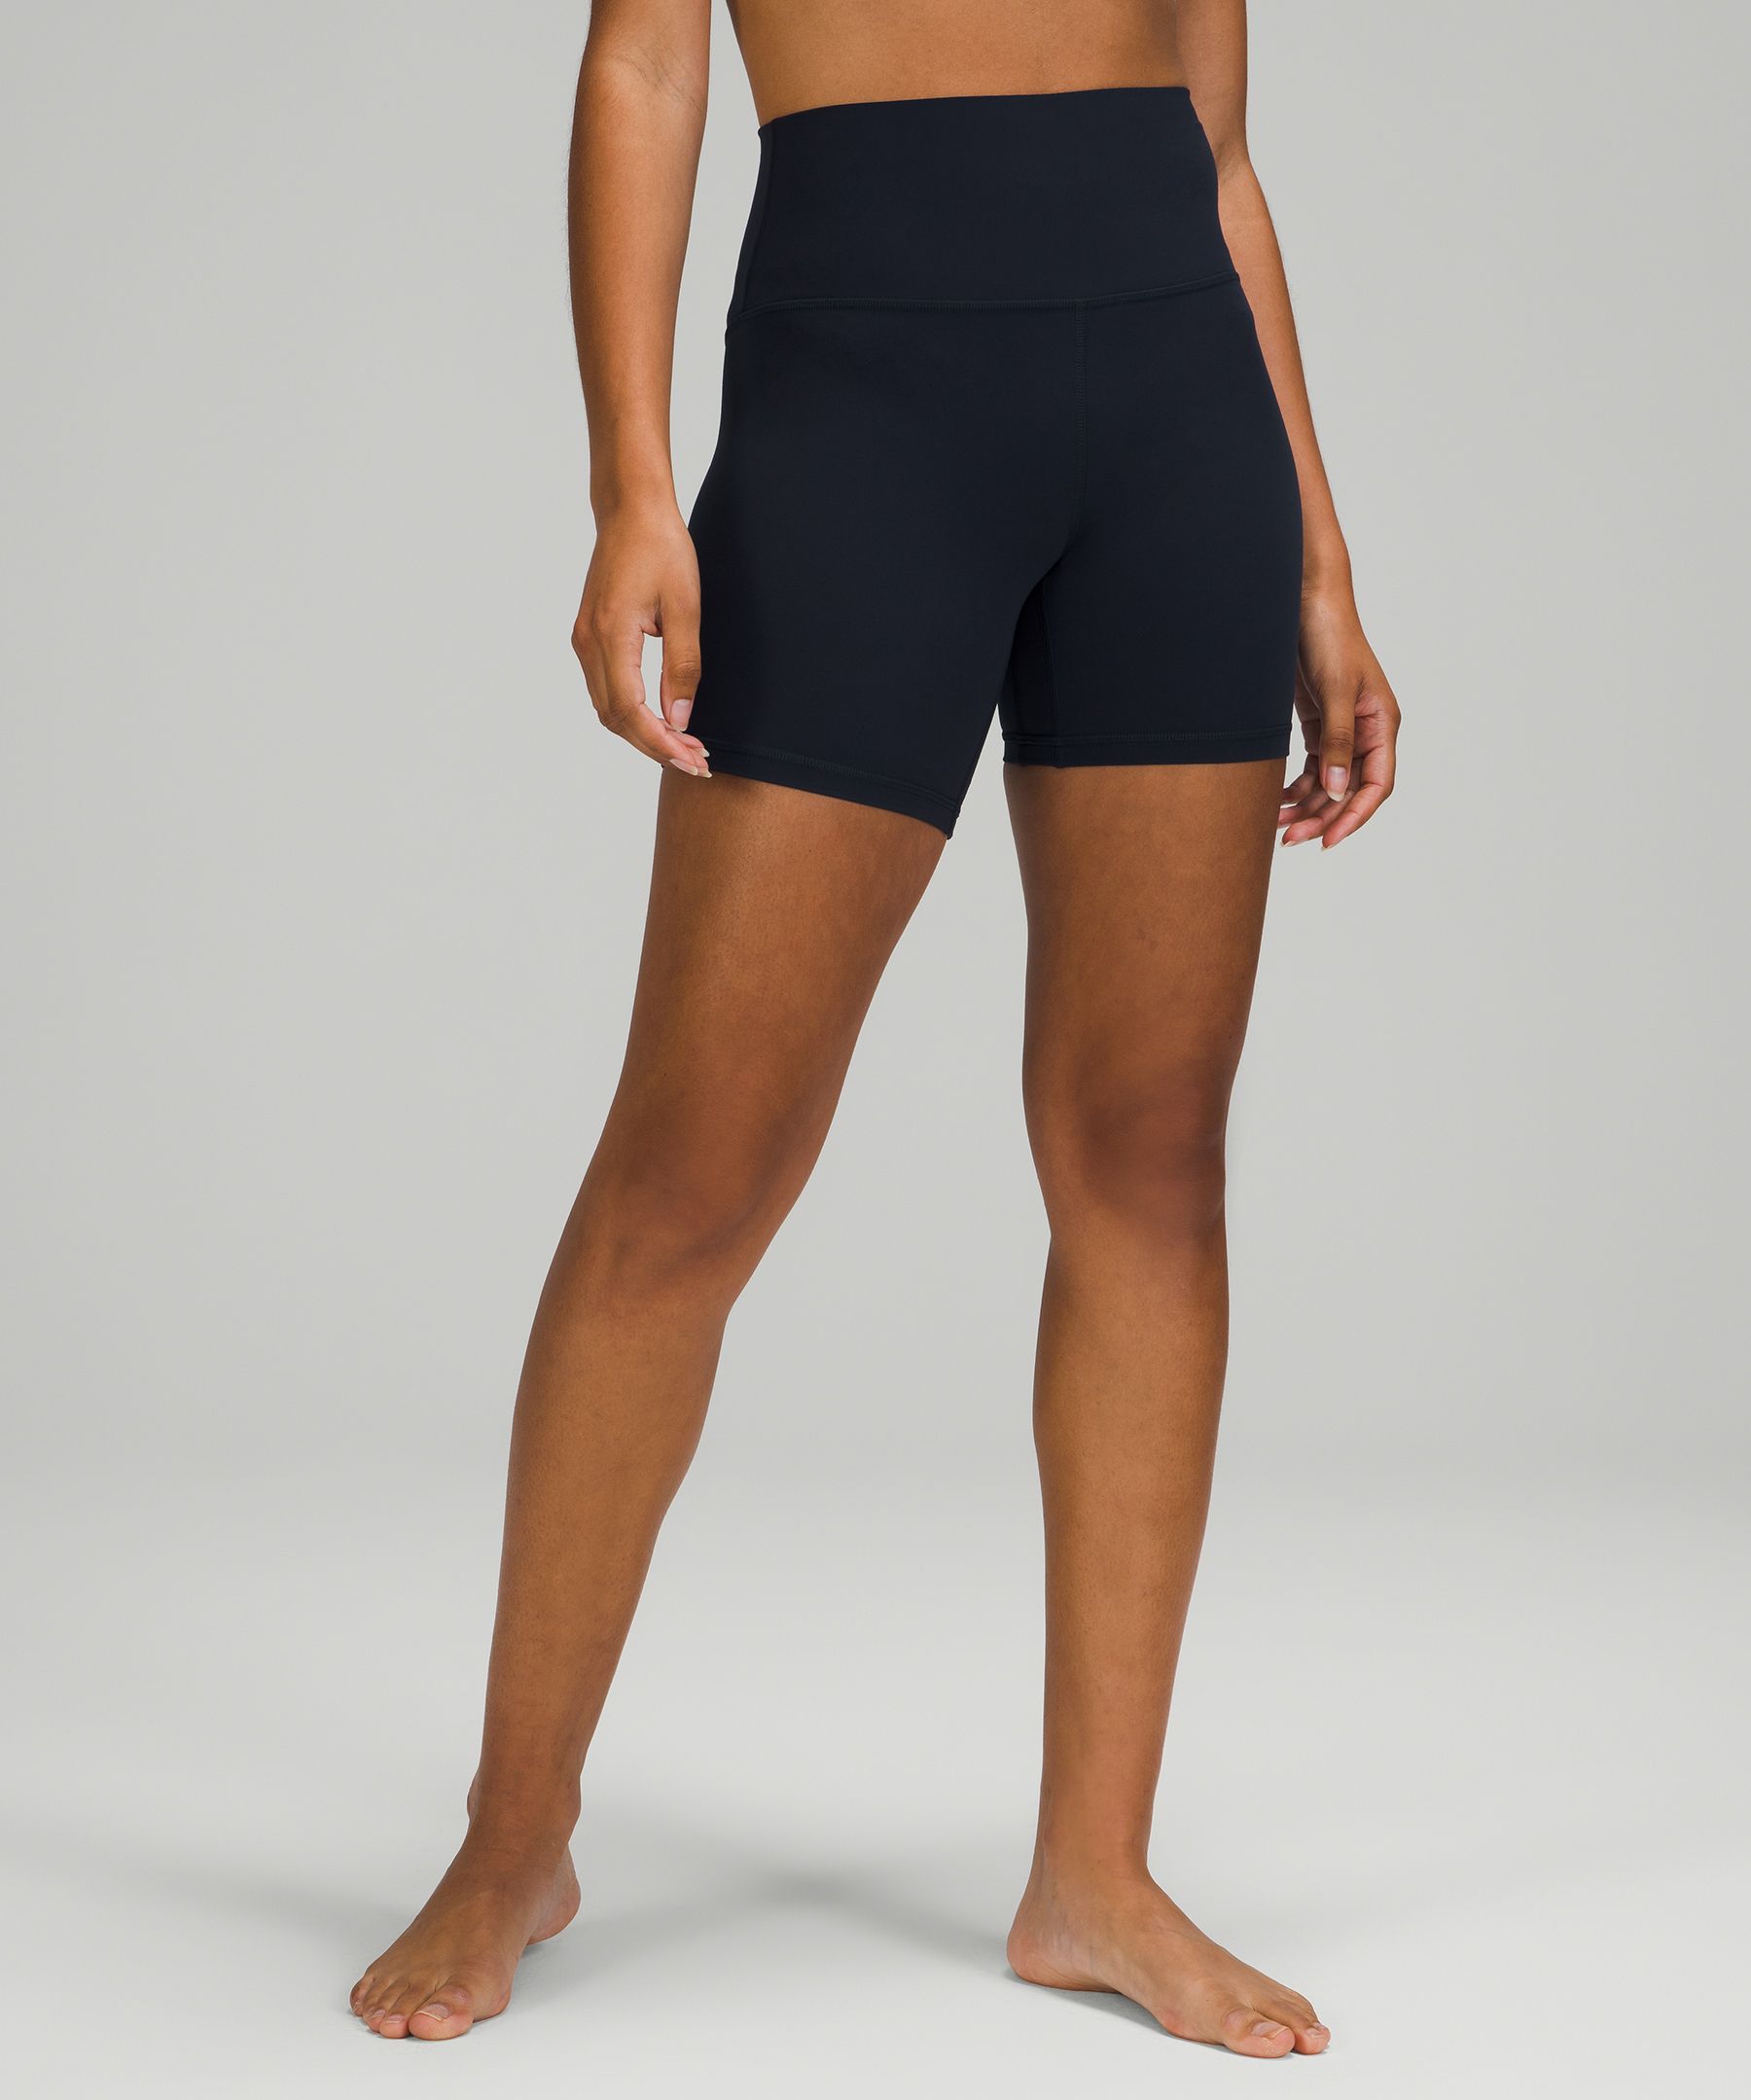 The Lululemon Align biker shorts are worth the investment